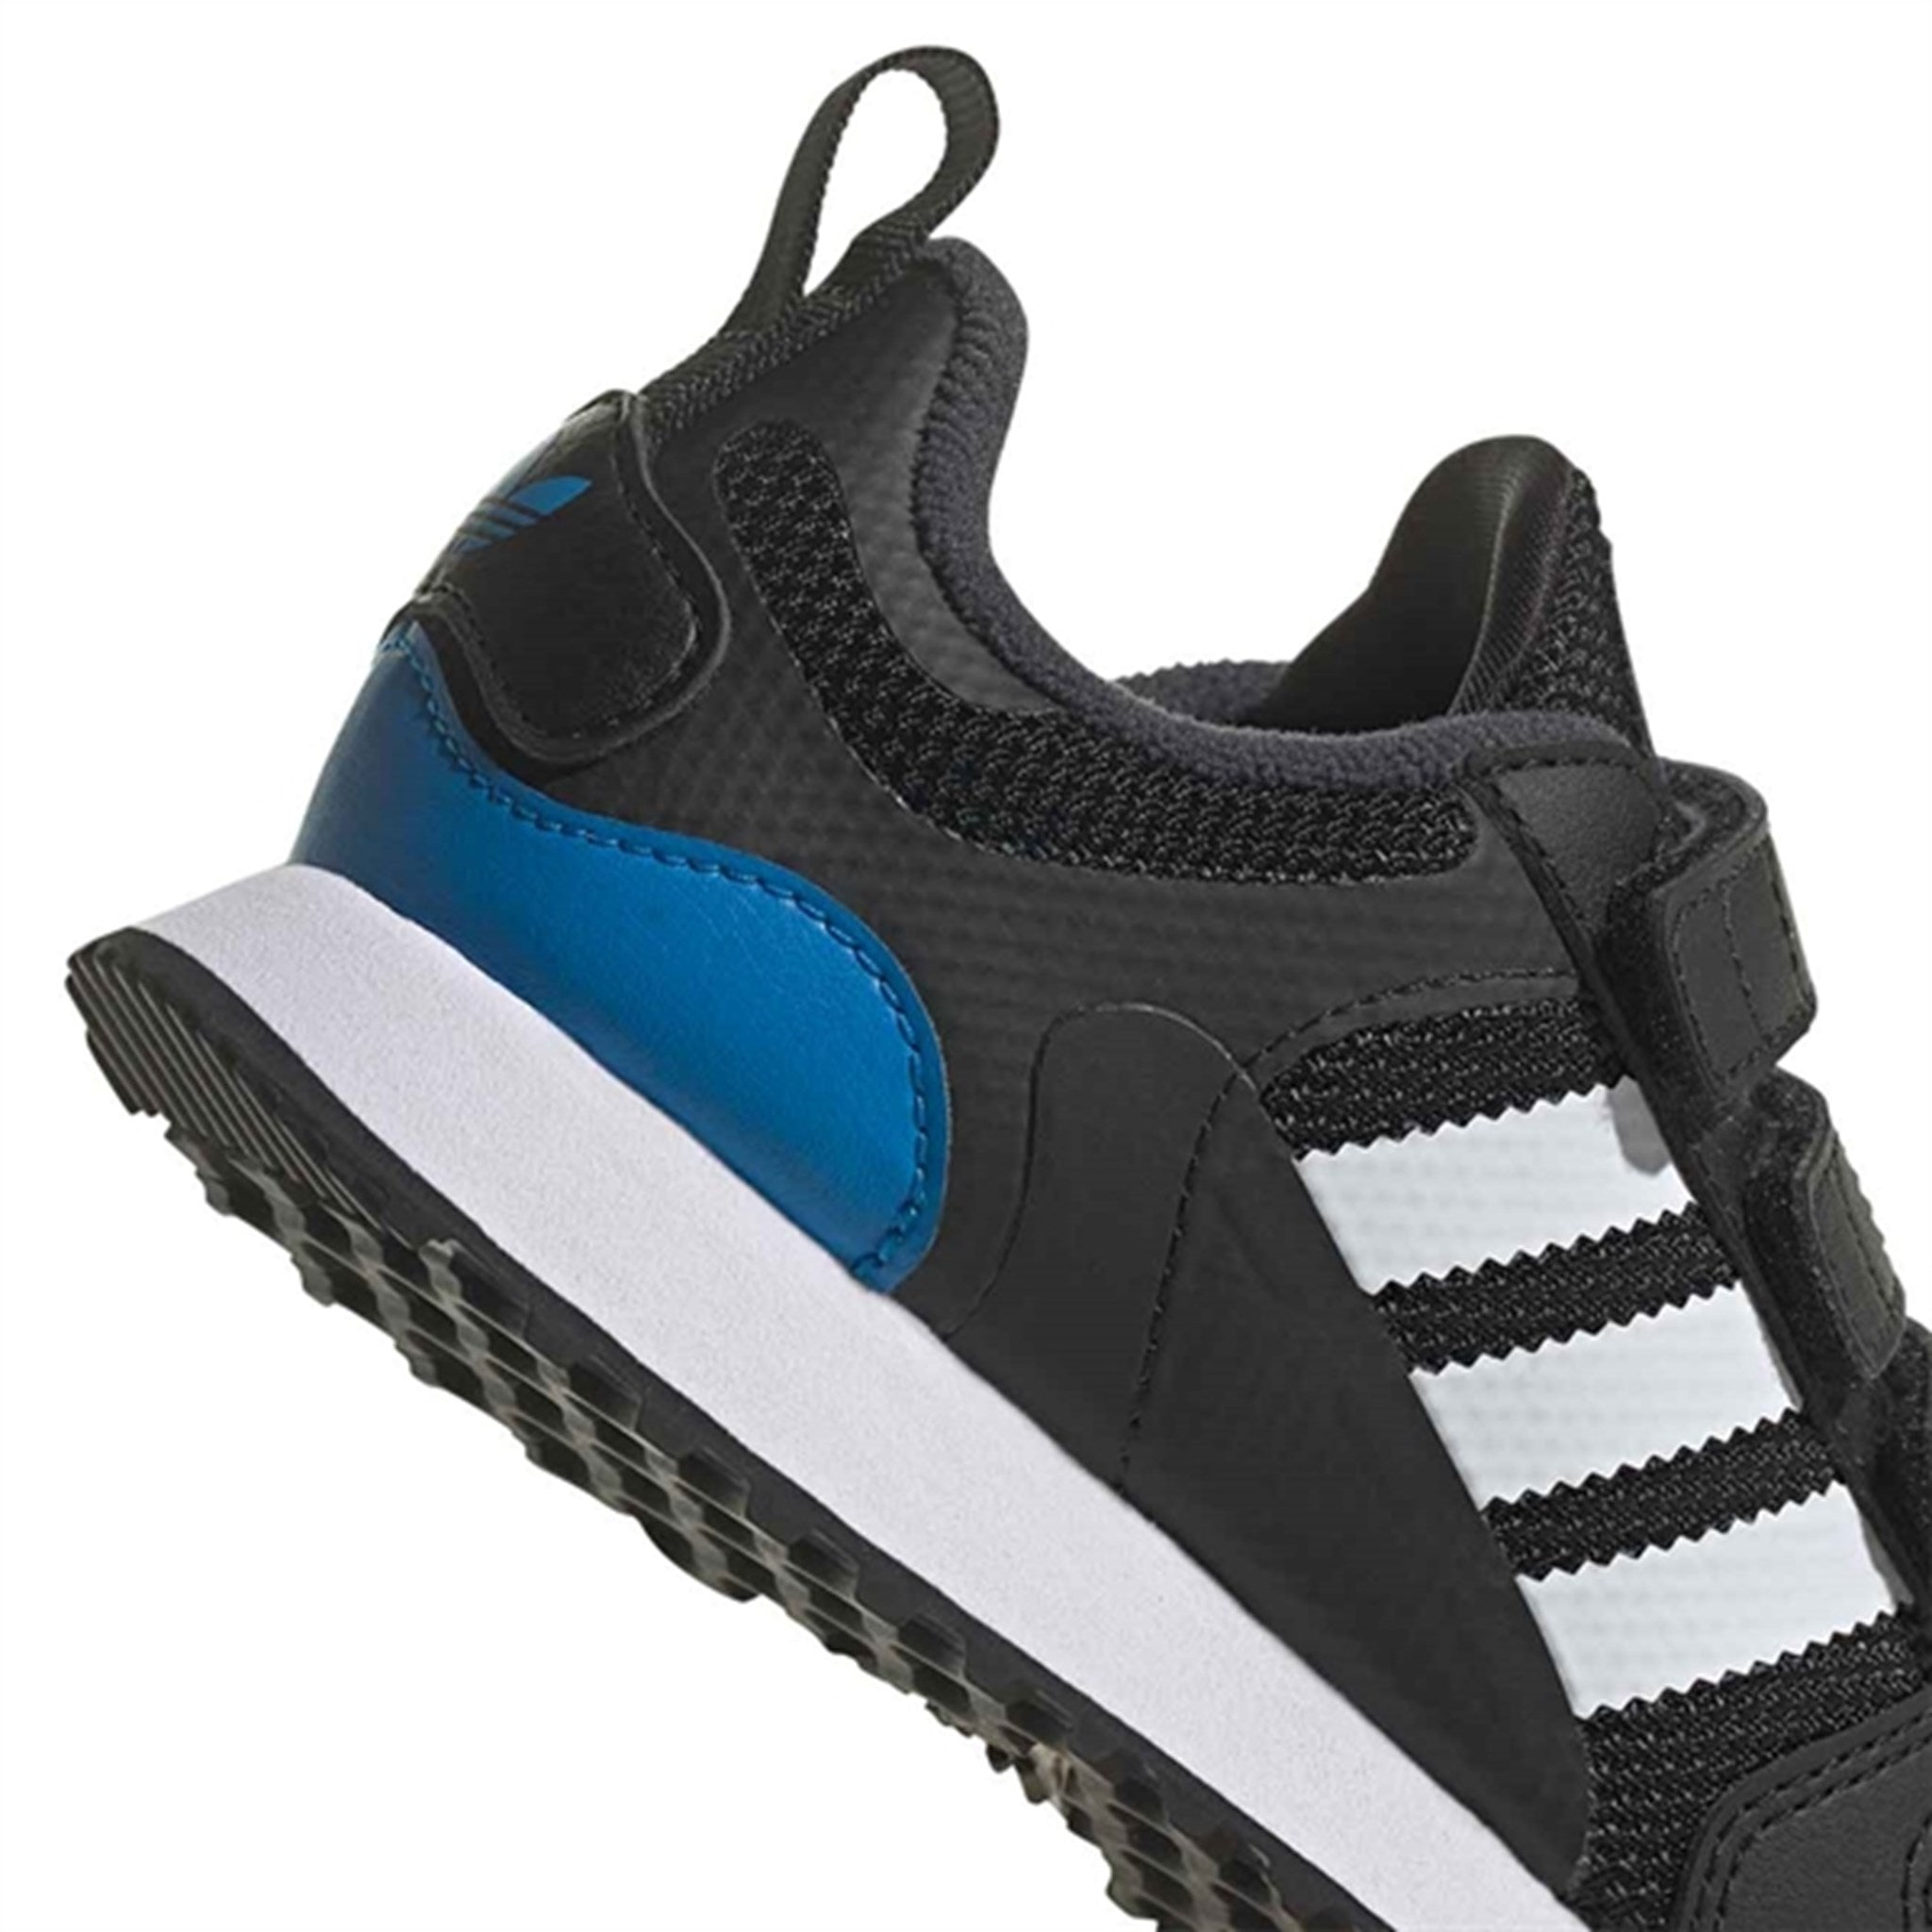 adidas ZX 700 HD Sneakers Black White Carbon 3